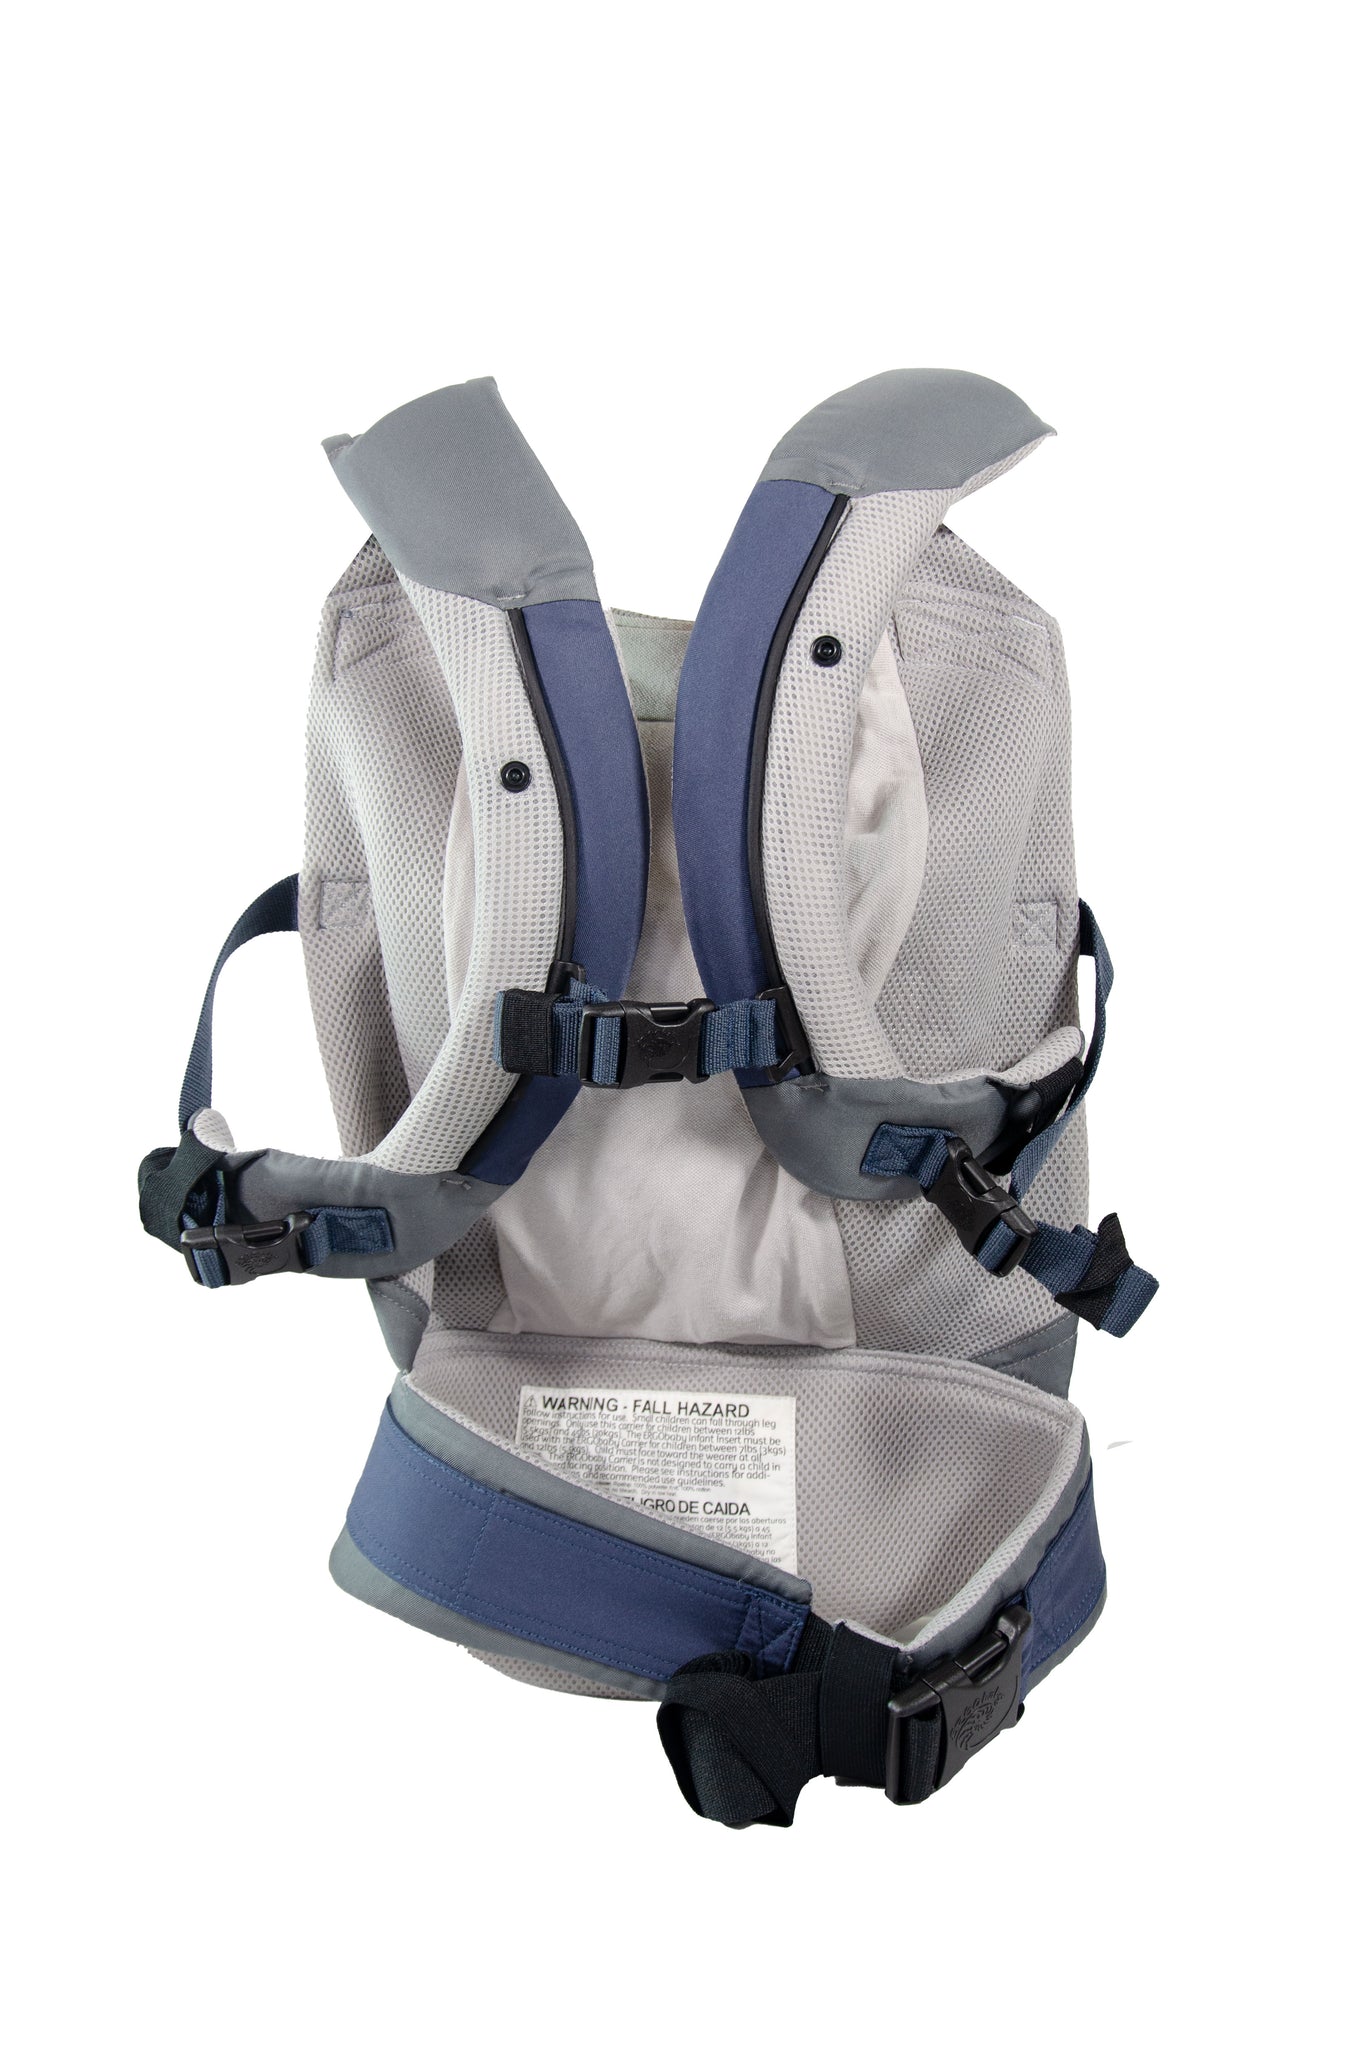 ergobaby carrier used